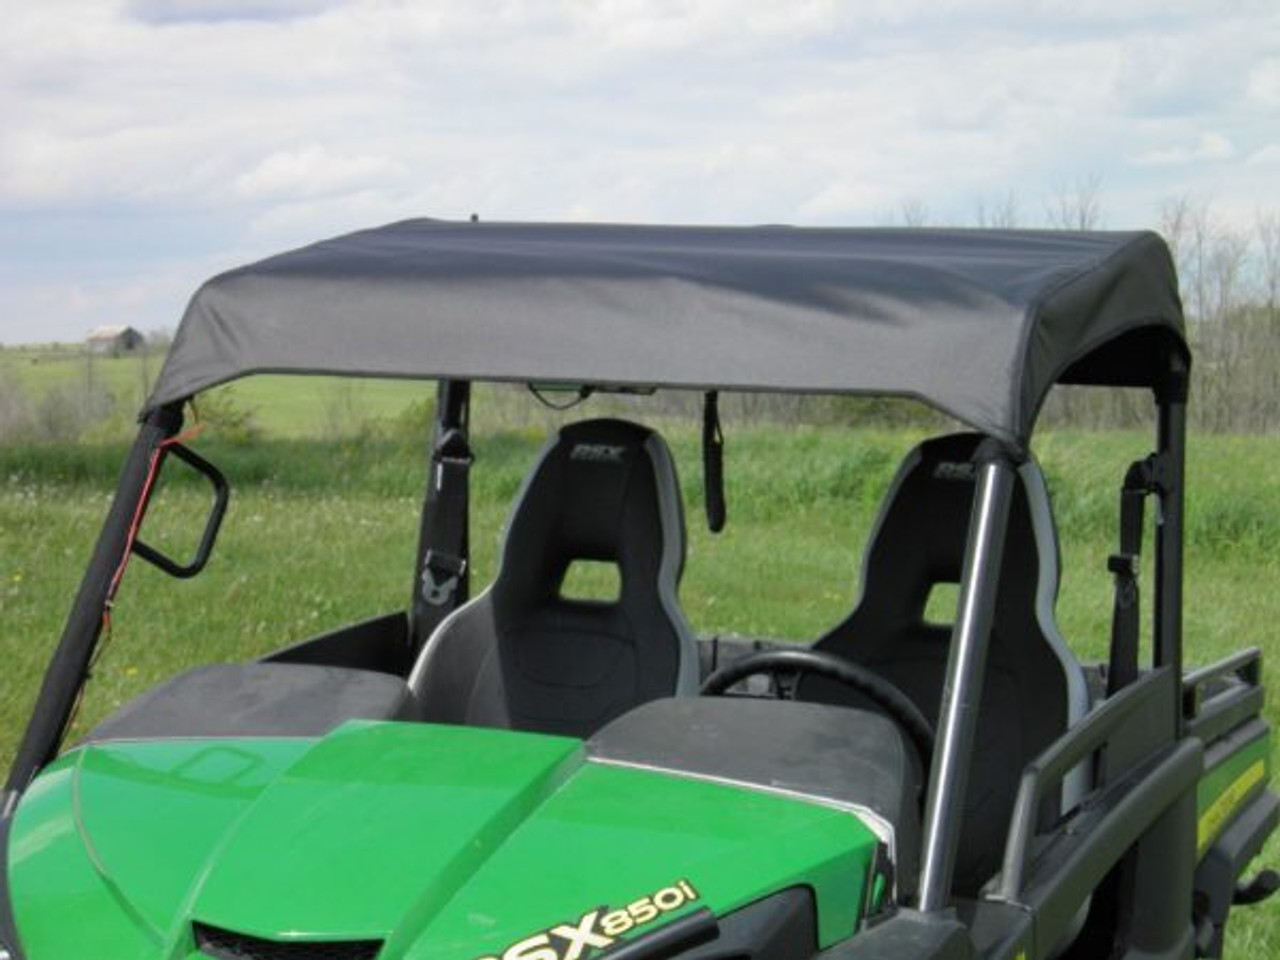 John Deere Gator RSX 850/860 Soft Top front angle view